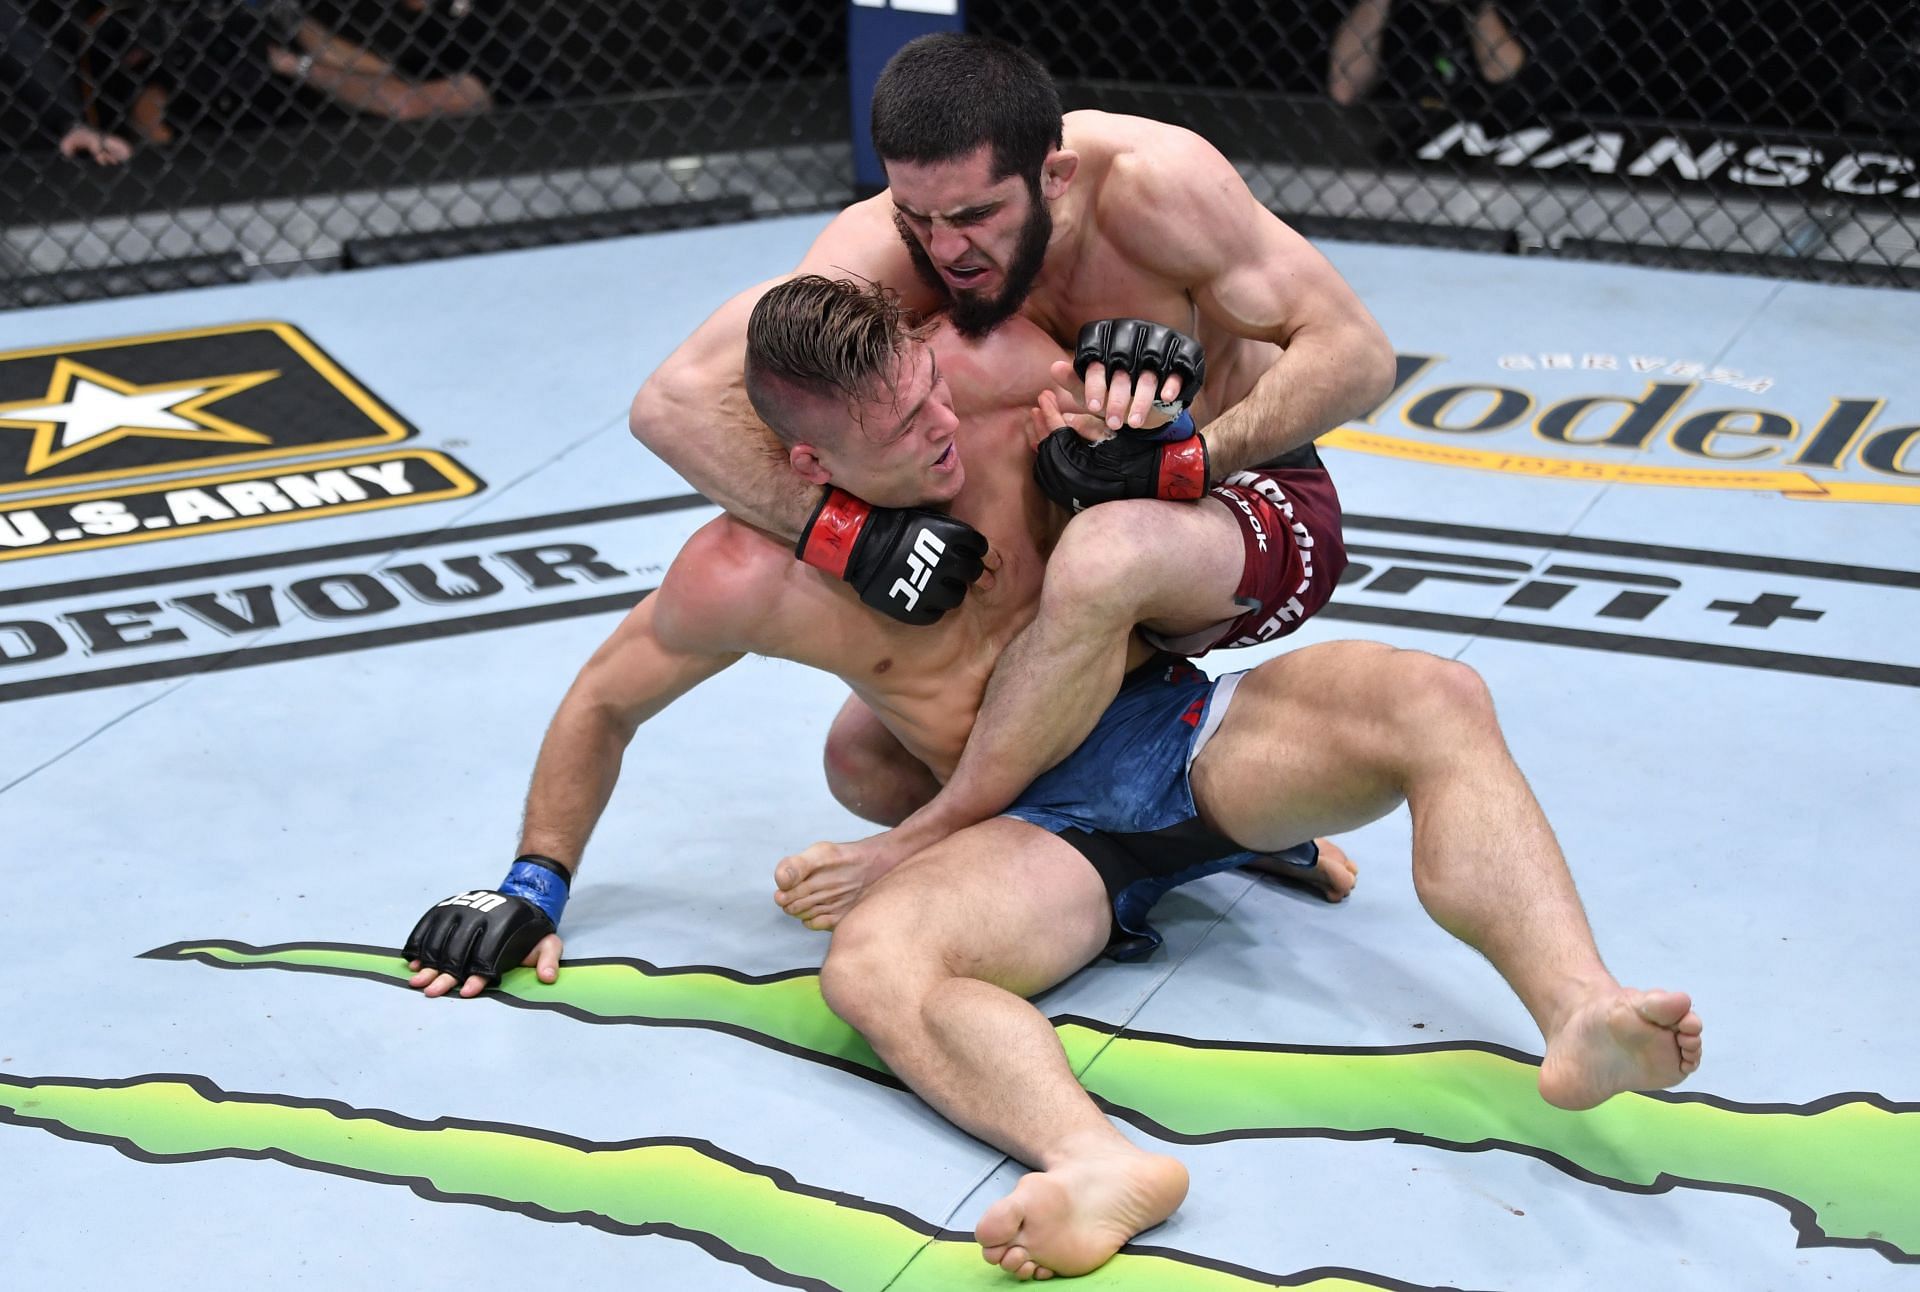 Islam Makhachev will be hopeful of getting the better of Alexander Volkanovski on the ground